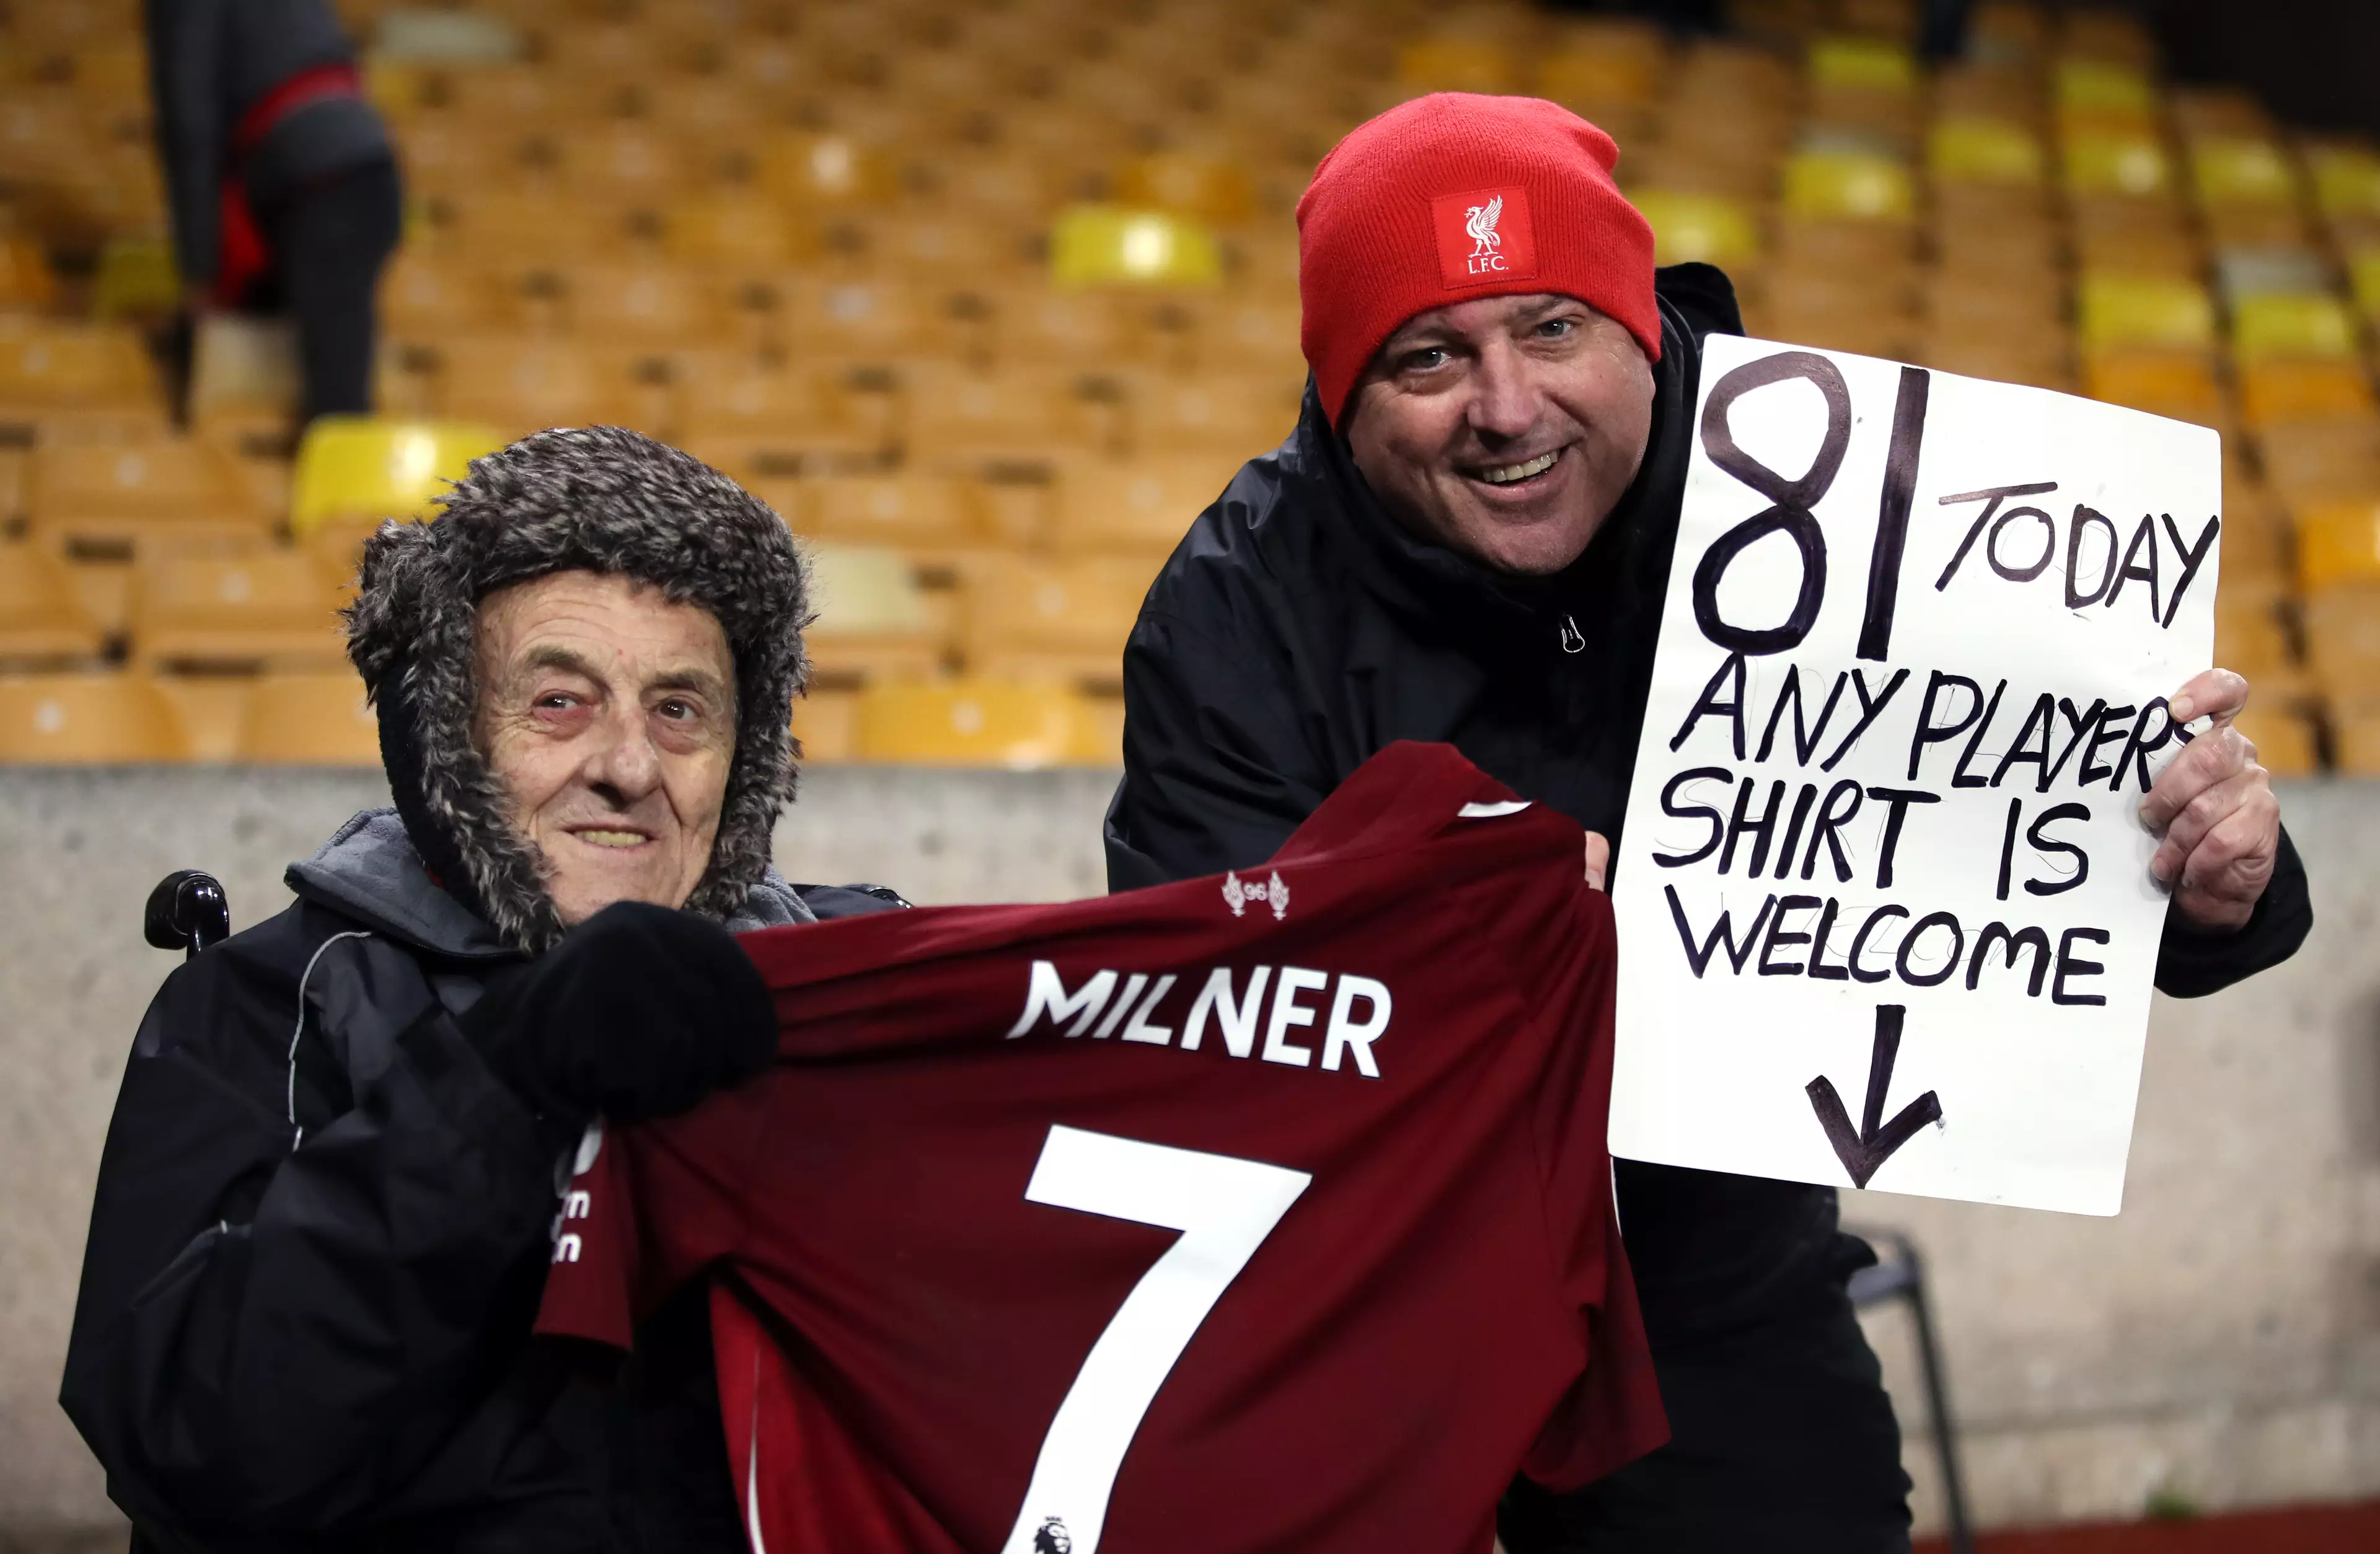 One fan tries to help get a Liverpool shirt. Image: PA Images